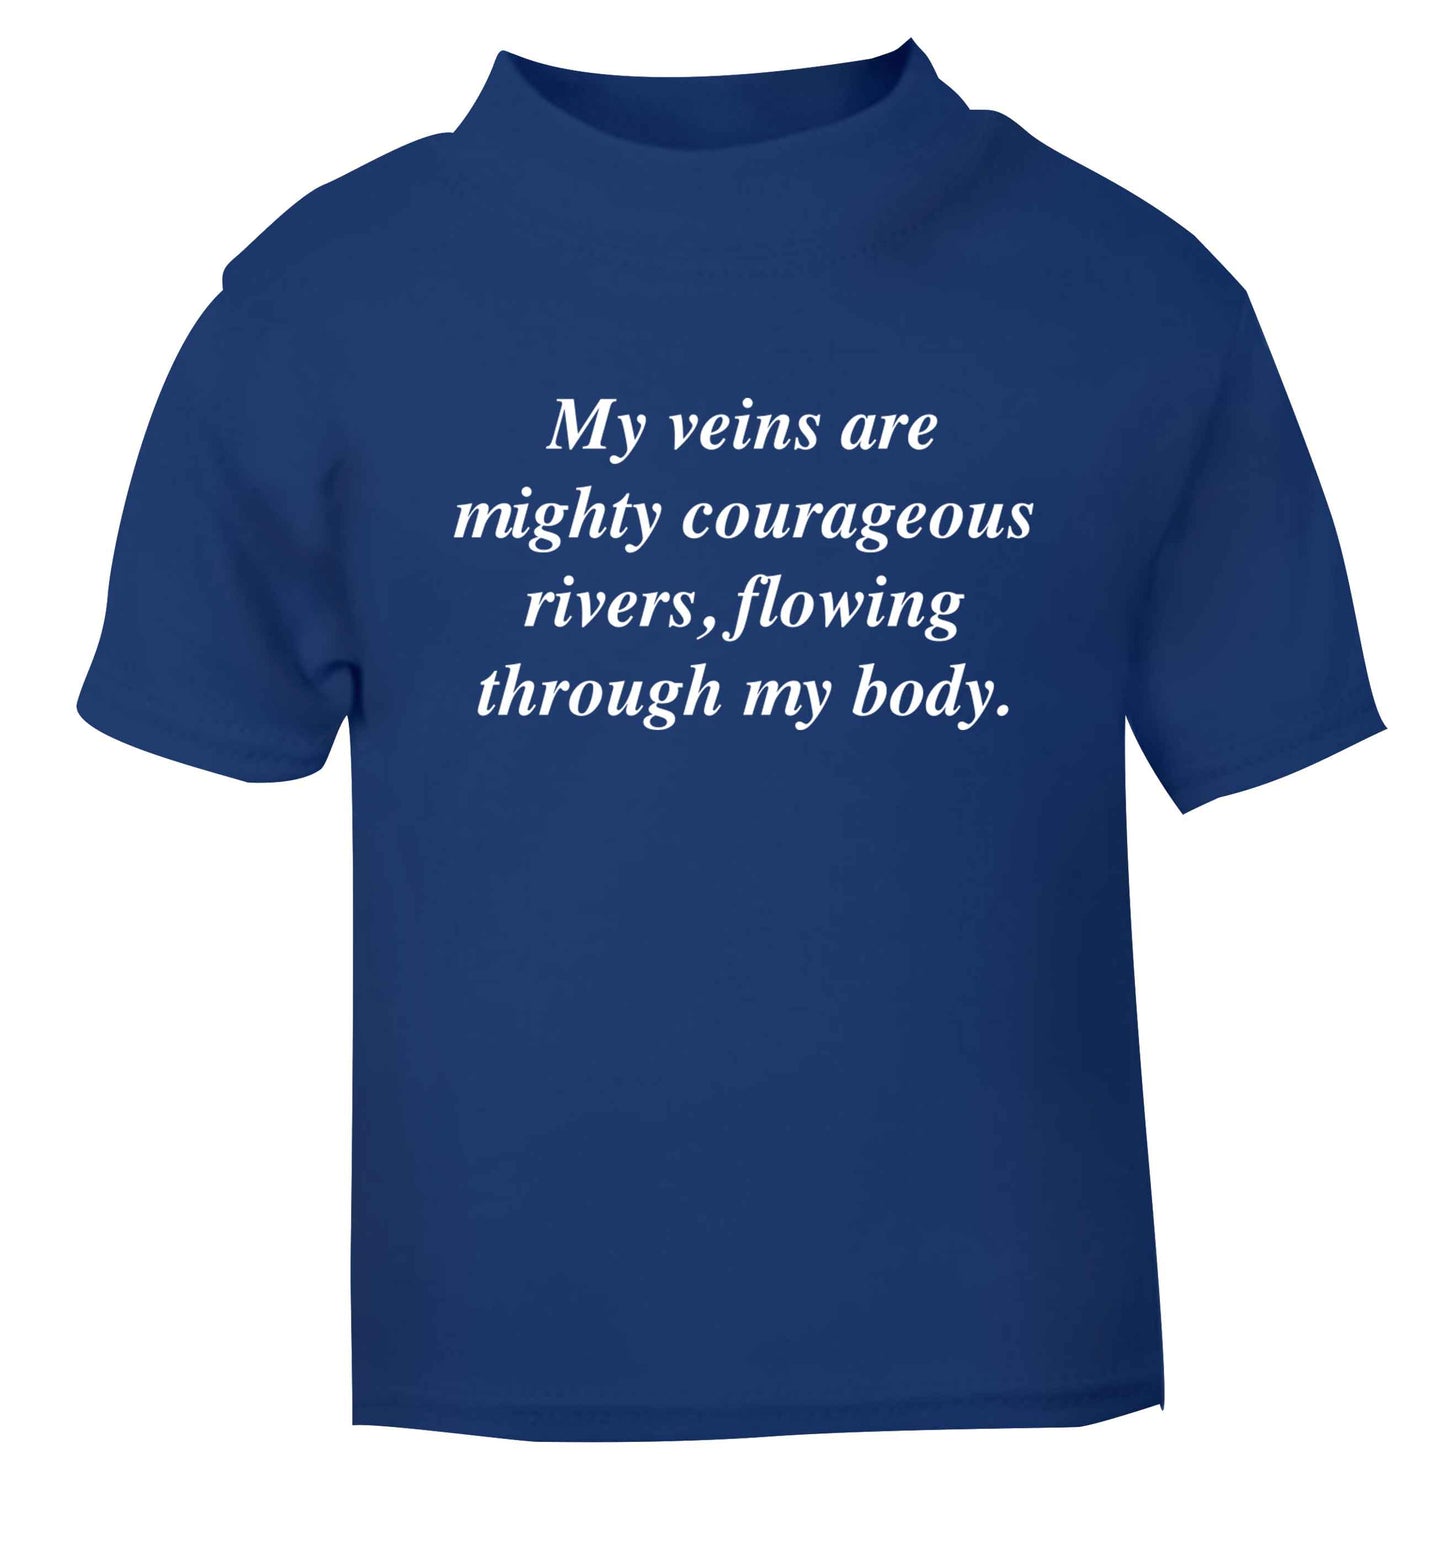 My veins are mighty courageous rivers, flowing through my body blue baby toddler Tshirt 2 Years